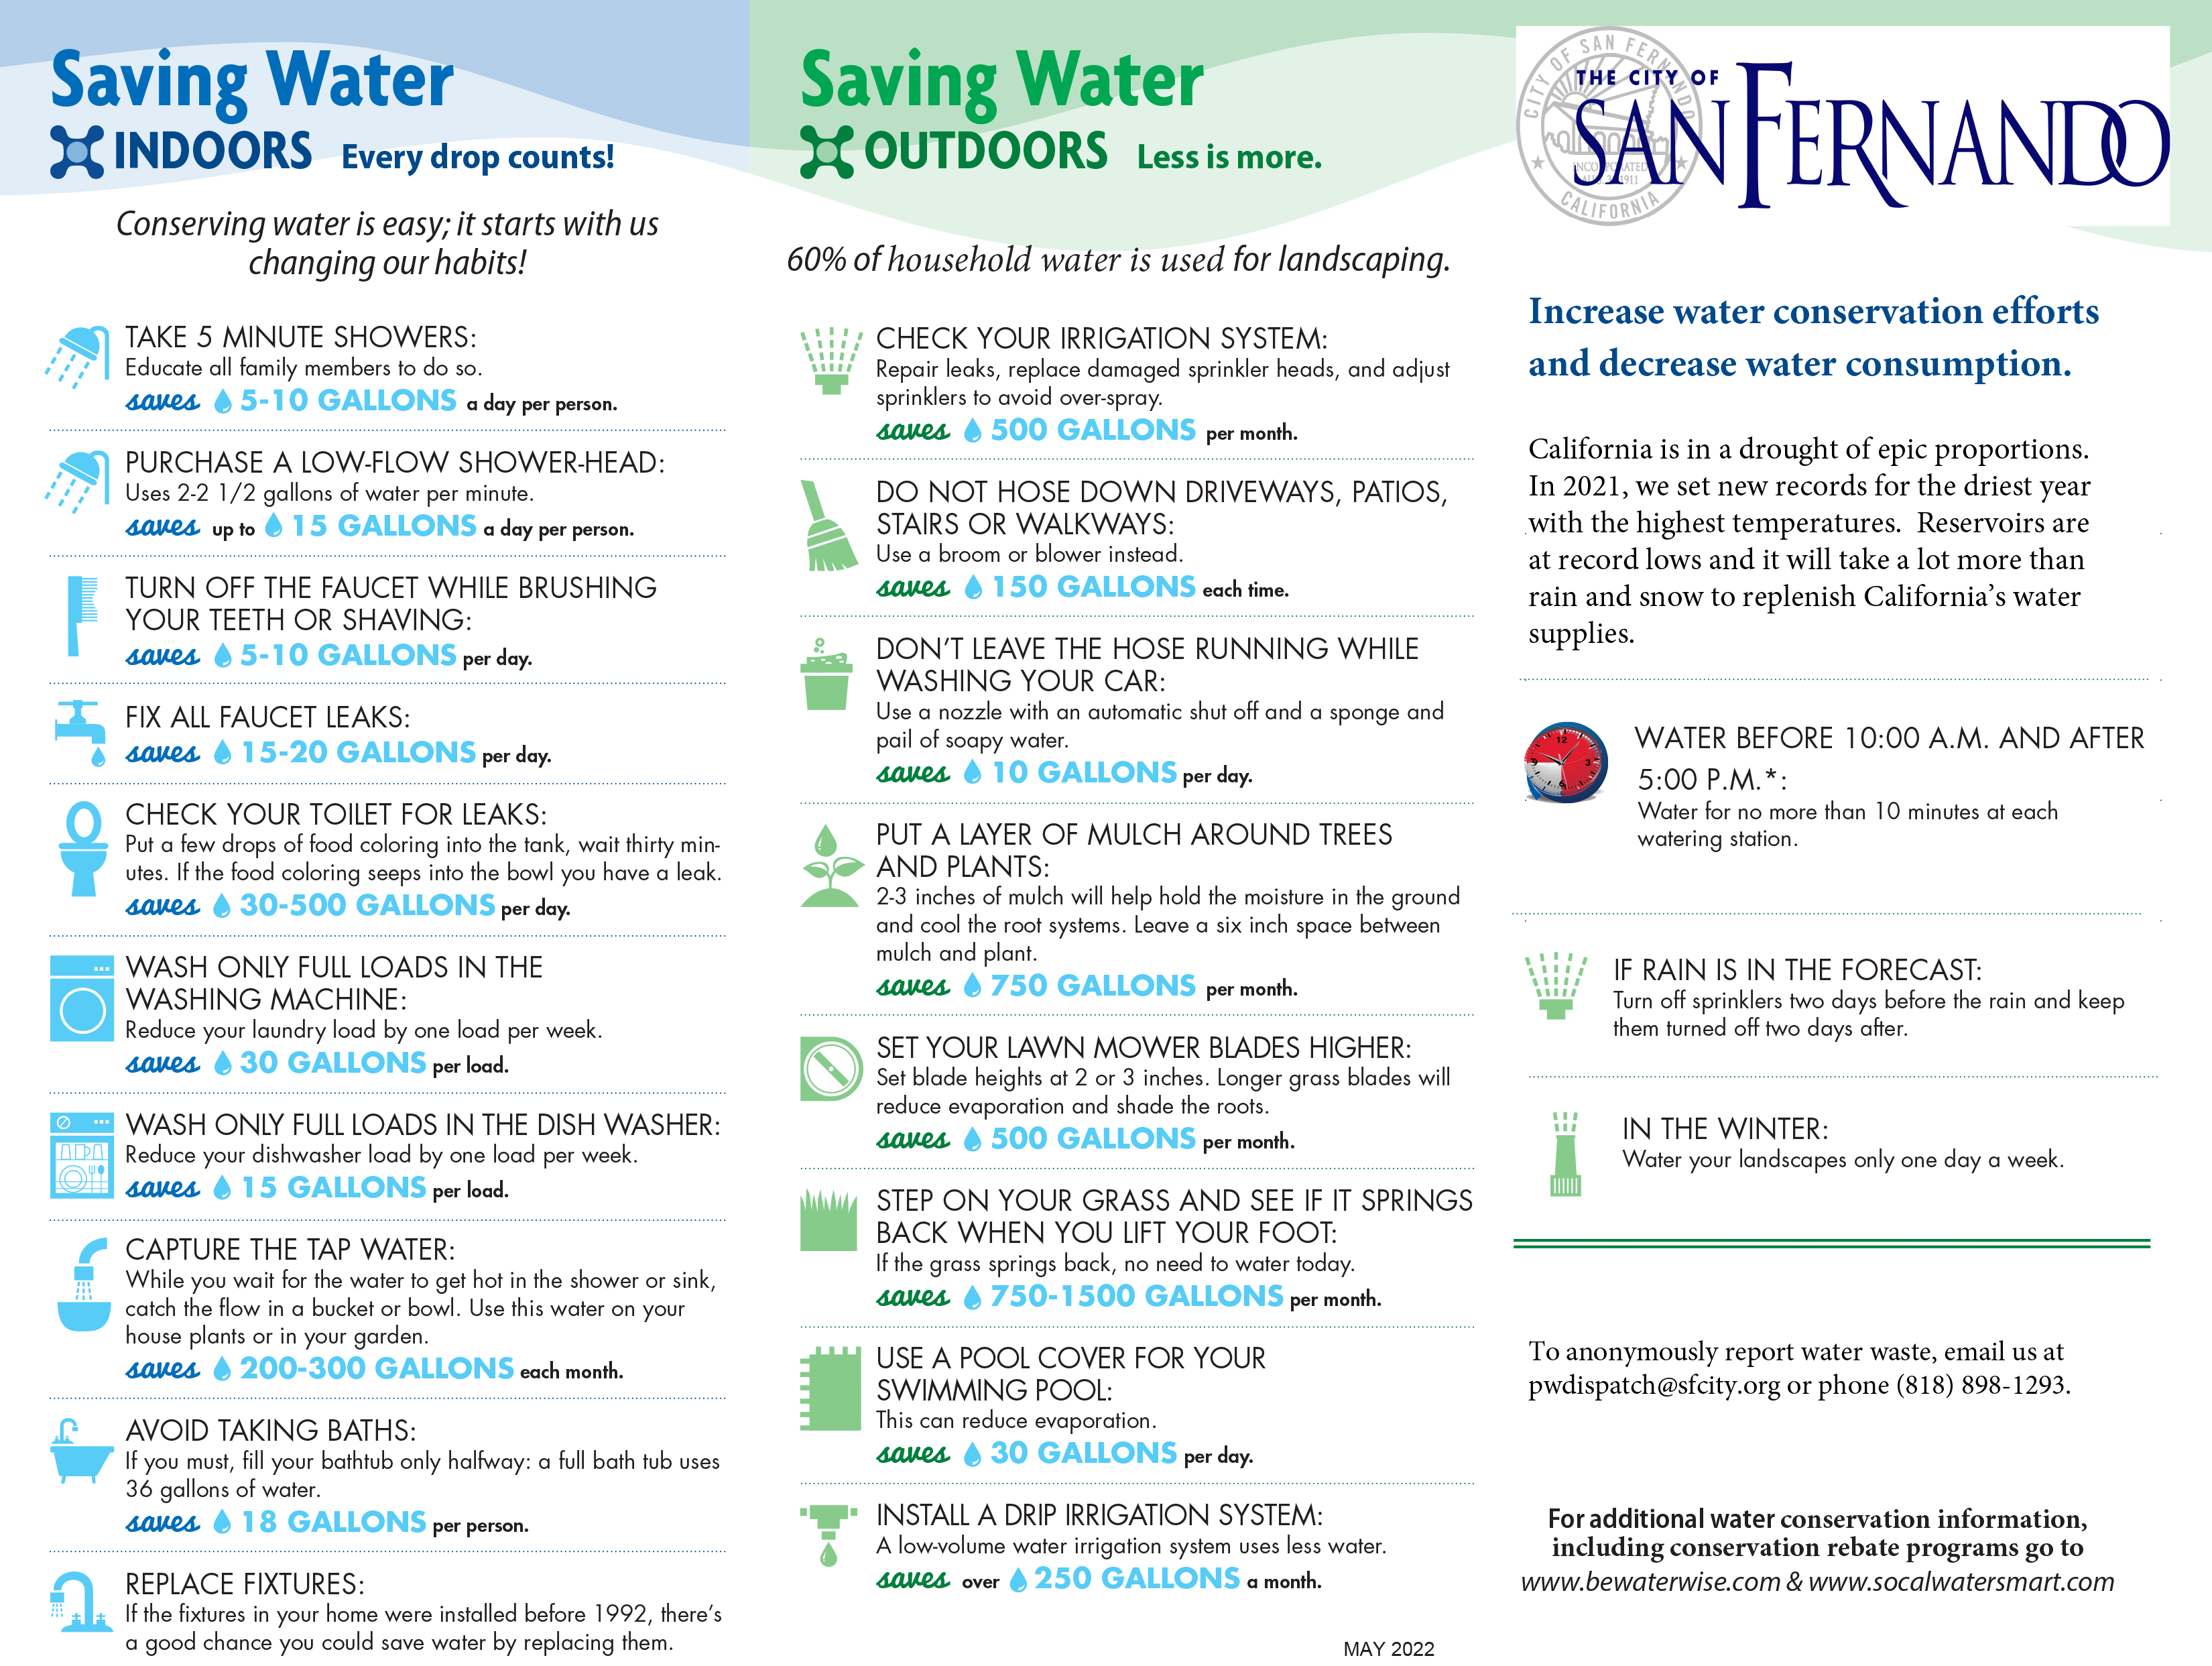 Increase water conservation efforts and decrease water consumption. California is in a drought of epic proportions. In 2021, we set new records for the driest year with the highest temperatures. Reservoirs are at record lows and it will take a lot more than rain and snow to replenish California's water supplies. Tips for water conservation.